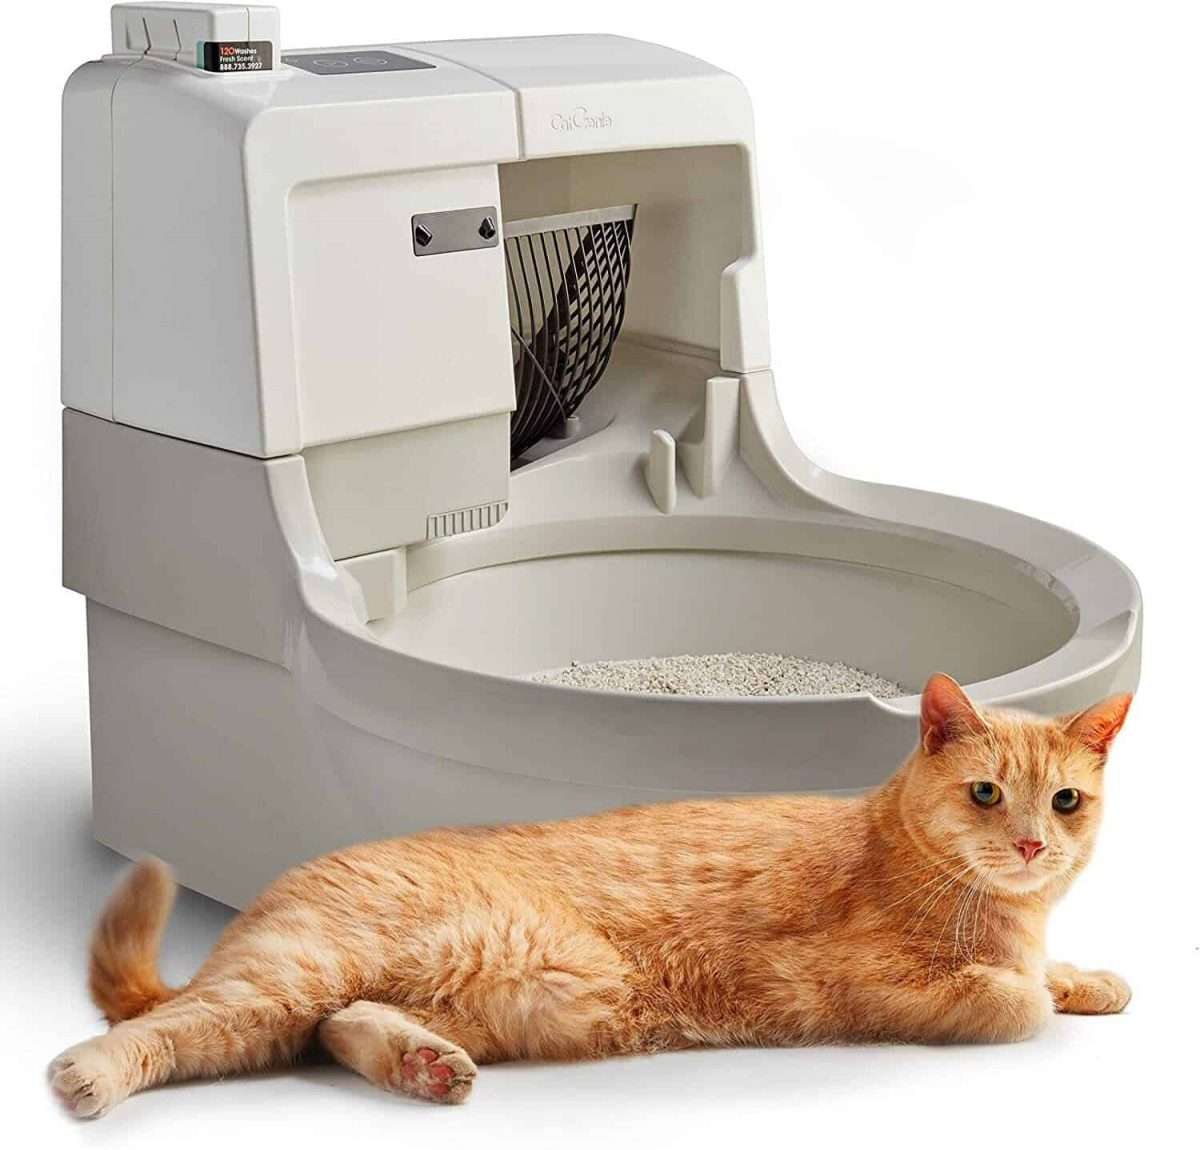 7 Best Automatic Litter Box For Self Cleaning [2021 Update]